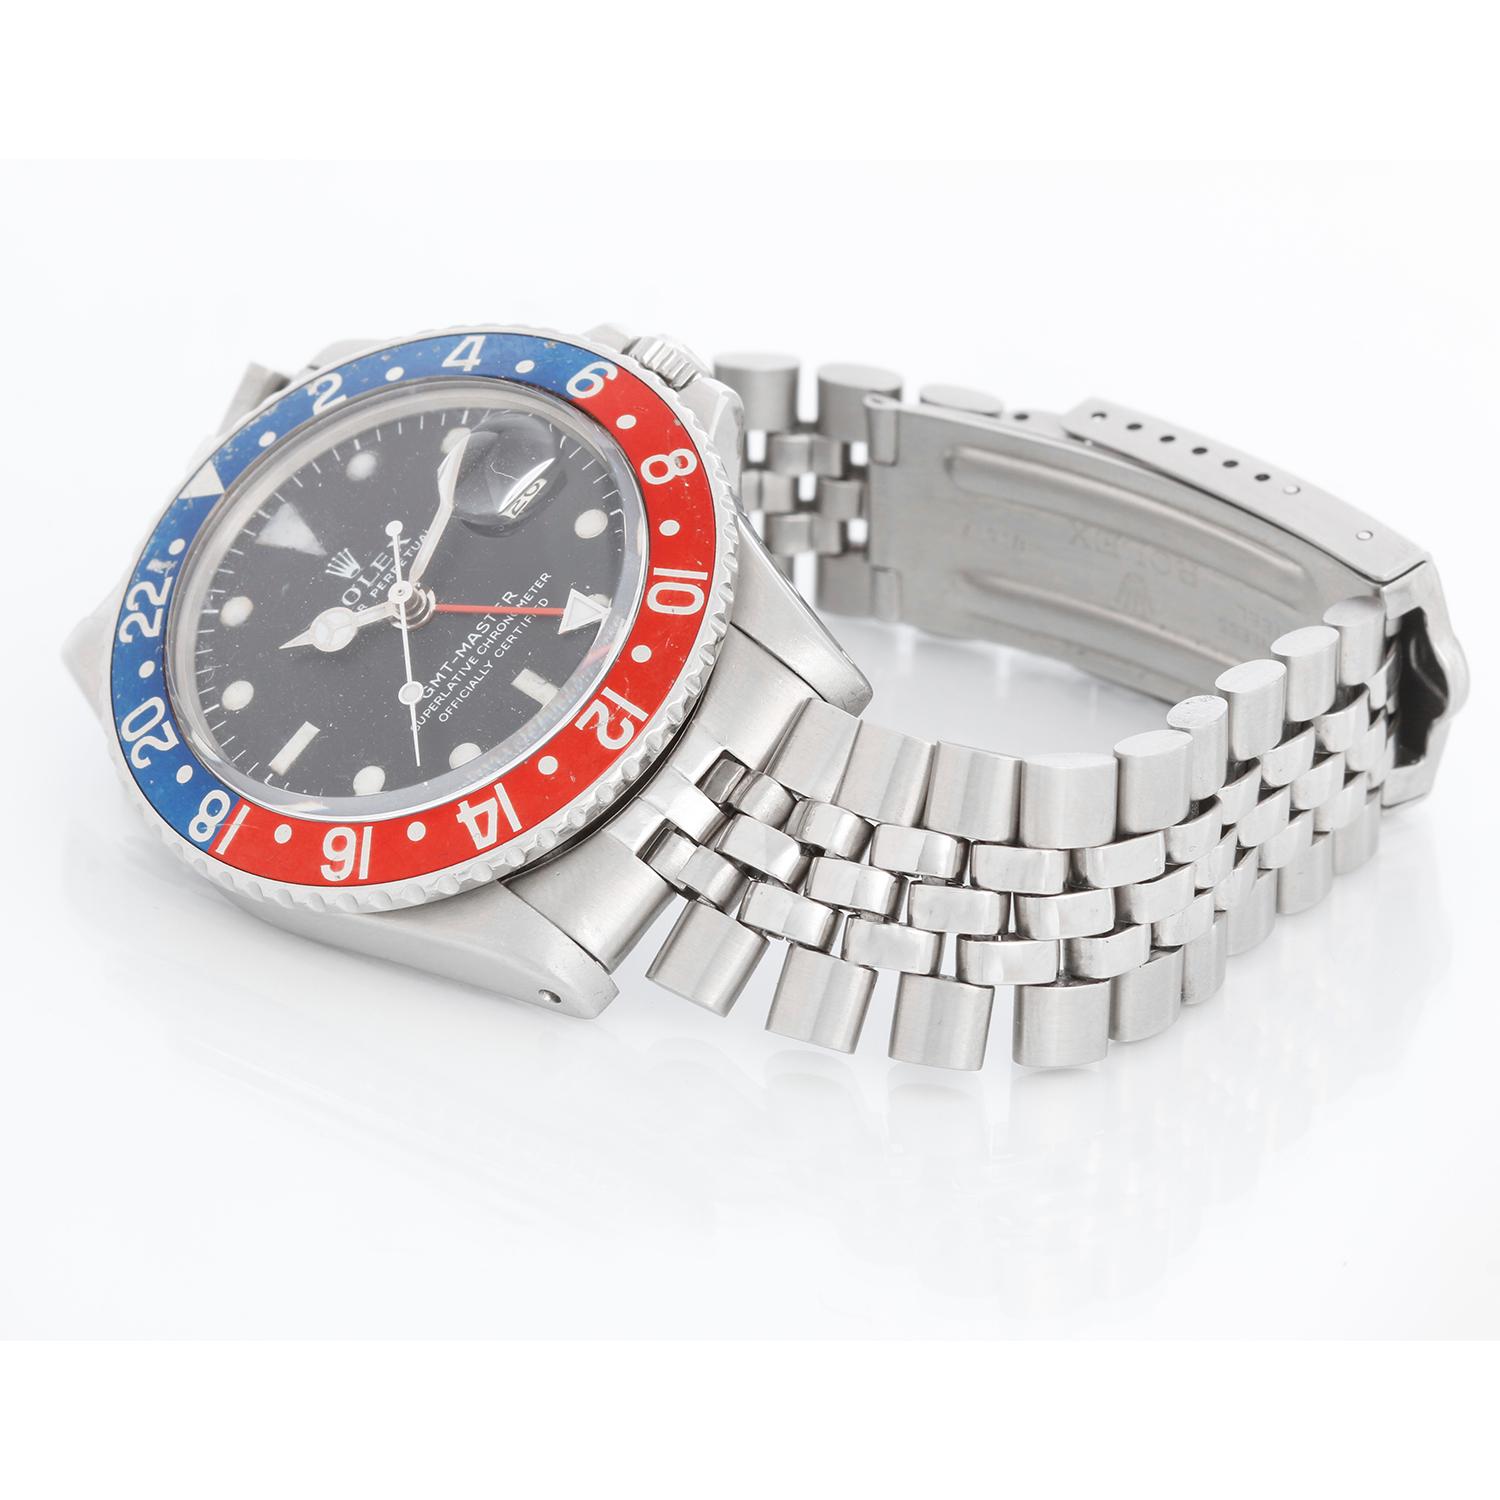 Rolex GMT-Master Stainless Steel Men's Watch 1675 - Automatic winding. Stainless steel case, rotating bezel with original red & blue (pepsi) insert  (40mm) . Black dial . Stainless steel Rolex USA Jubilee bracelet. Pre-owned with Rolex box. 

To